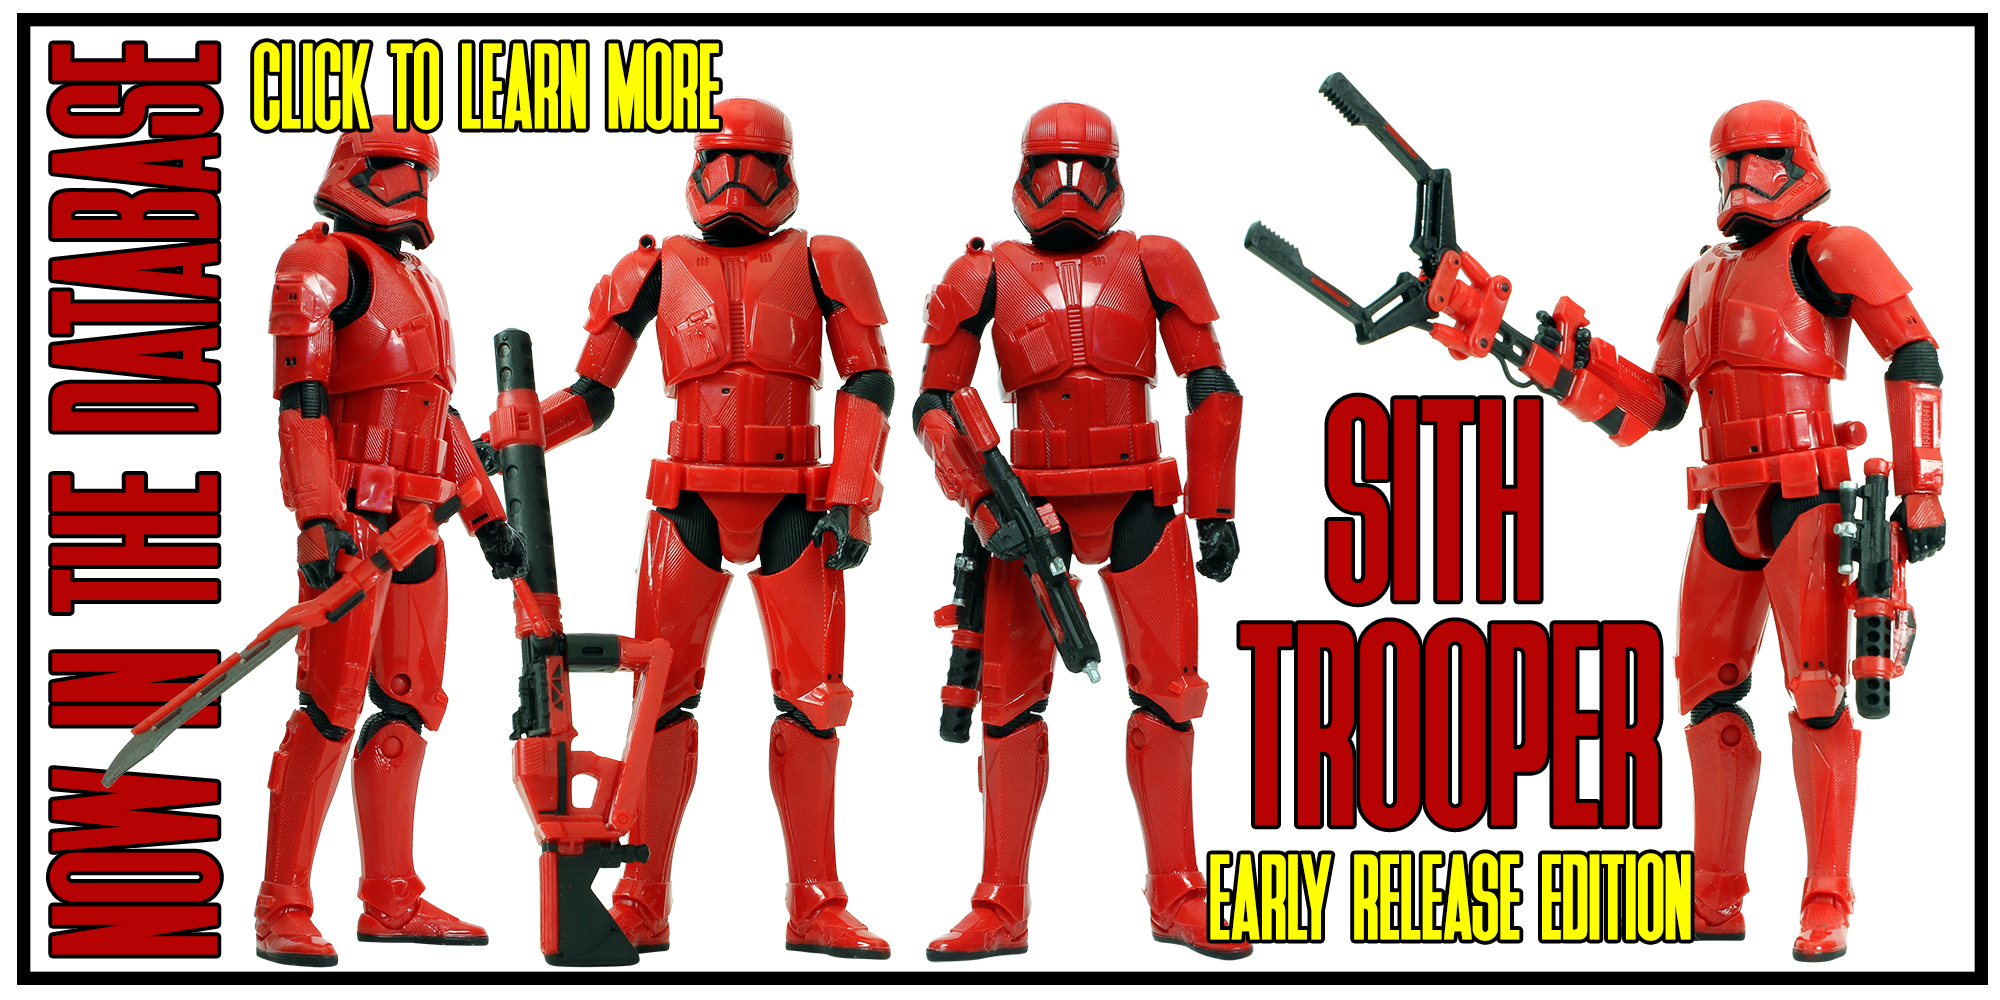 New Addition: Black Series Sith Trooper